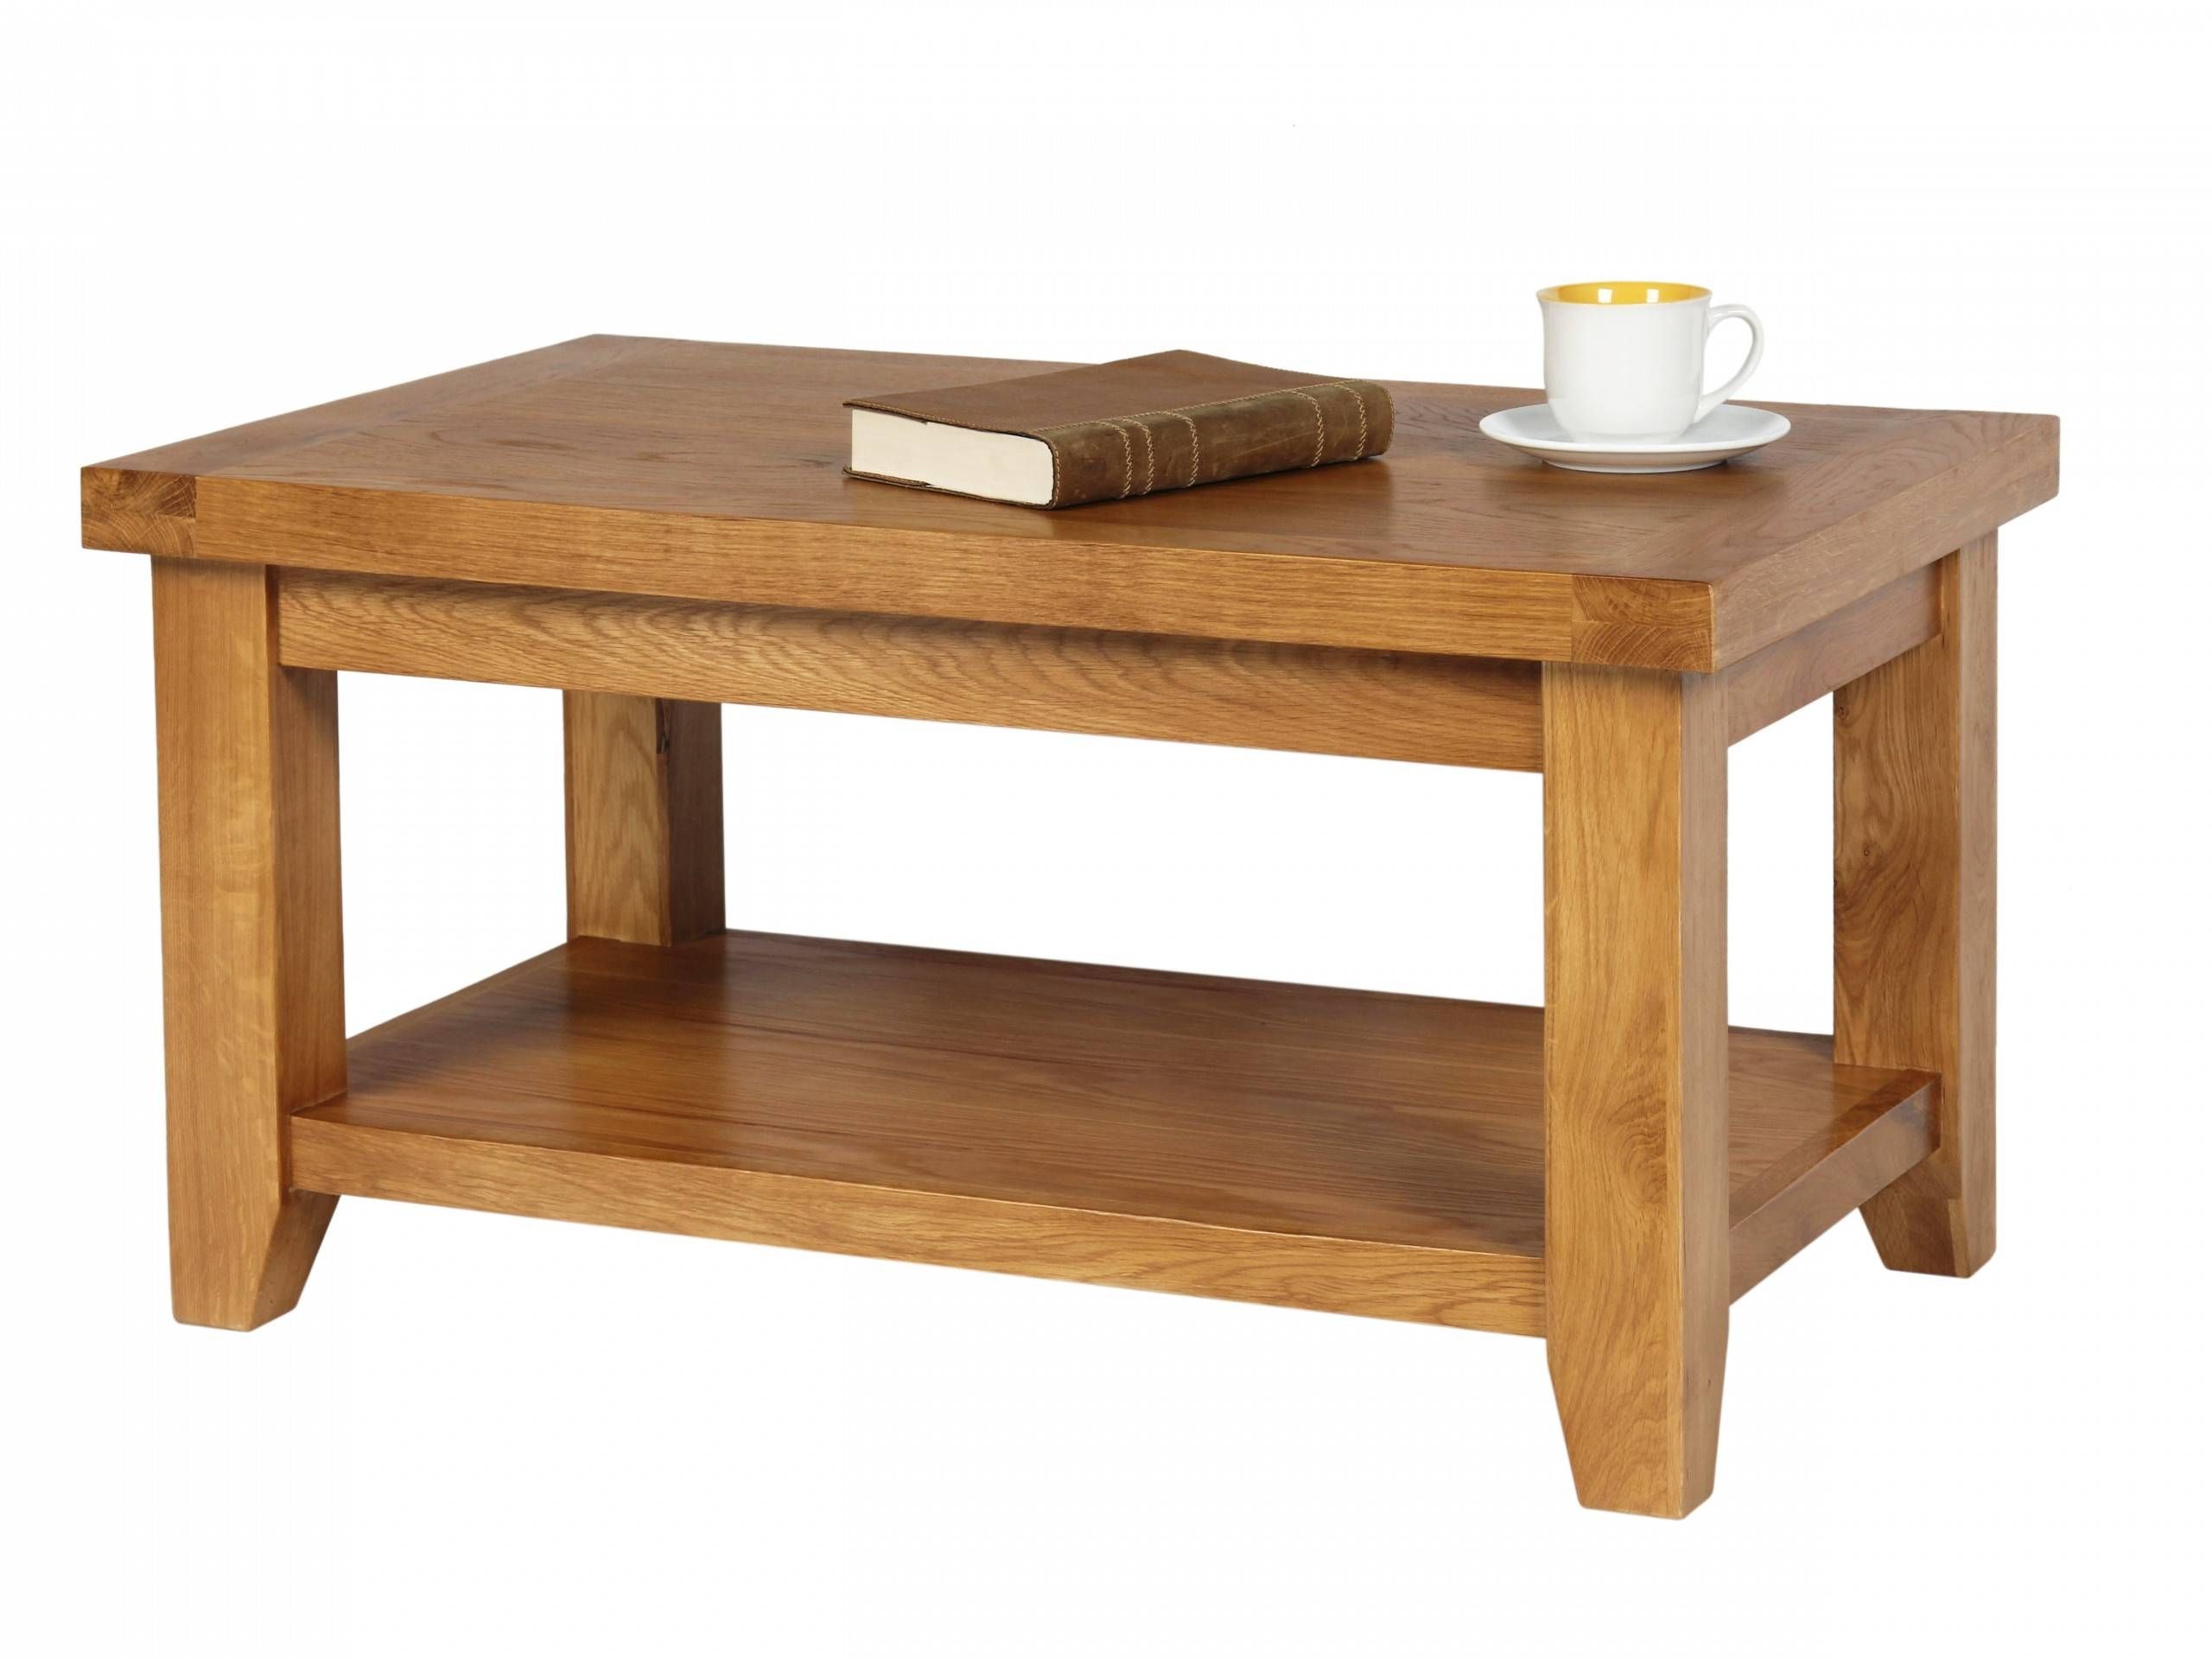 Buy Your Coffee Tables To Match Our Dining Room Furniture Ranges With Regard To Cheap Oak Coffee Tables (View 27 of 30)